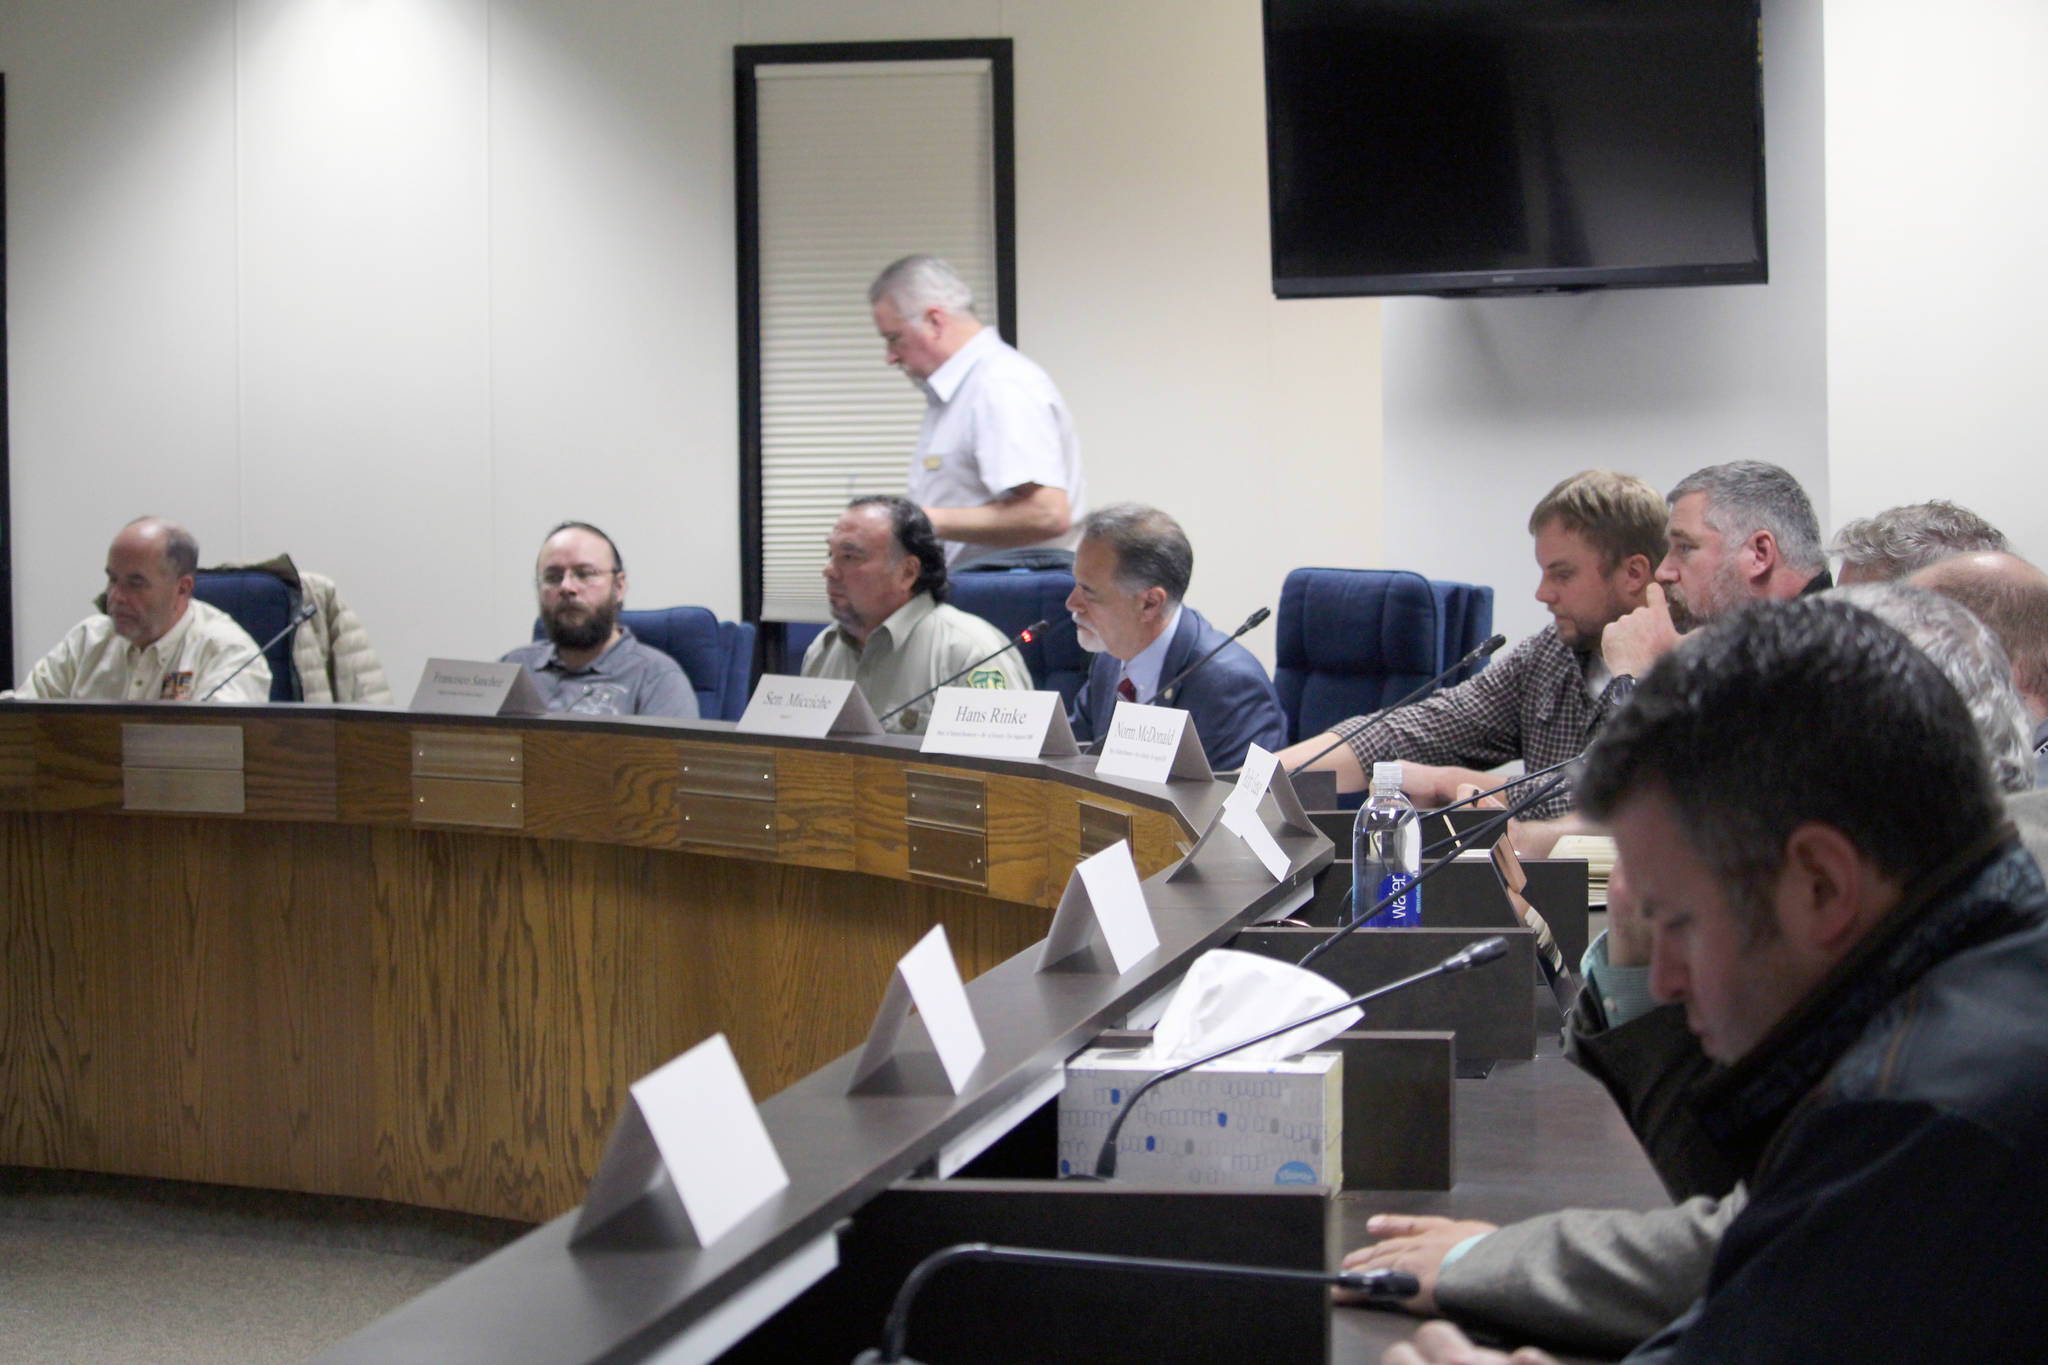 Representatives from local, state and federal agencies participate in a discussion about the Swan Lake Fire at the Kenai Peninsula Borough Assembly Chambers in Soldotna, Alaska on Nov. 13, 2019. (Photo by Brian Mazurek/Peninsula Clarion)